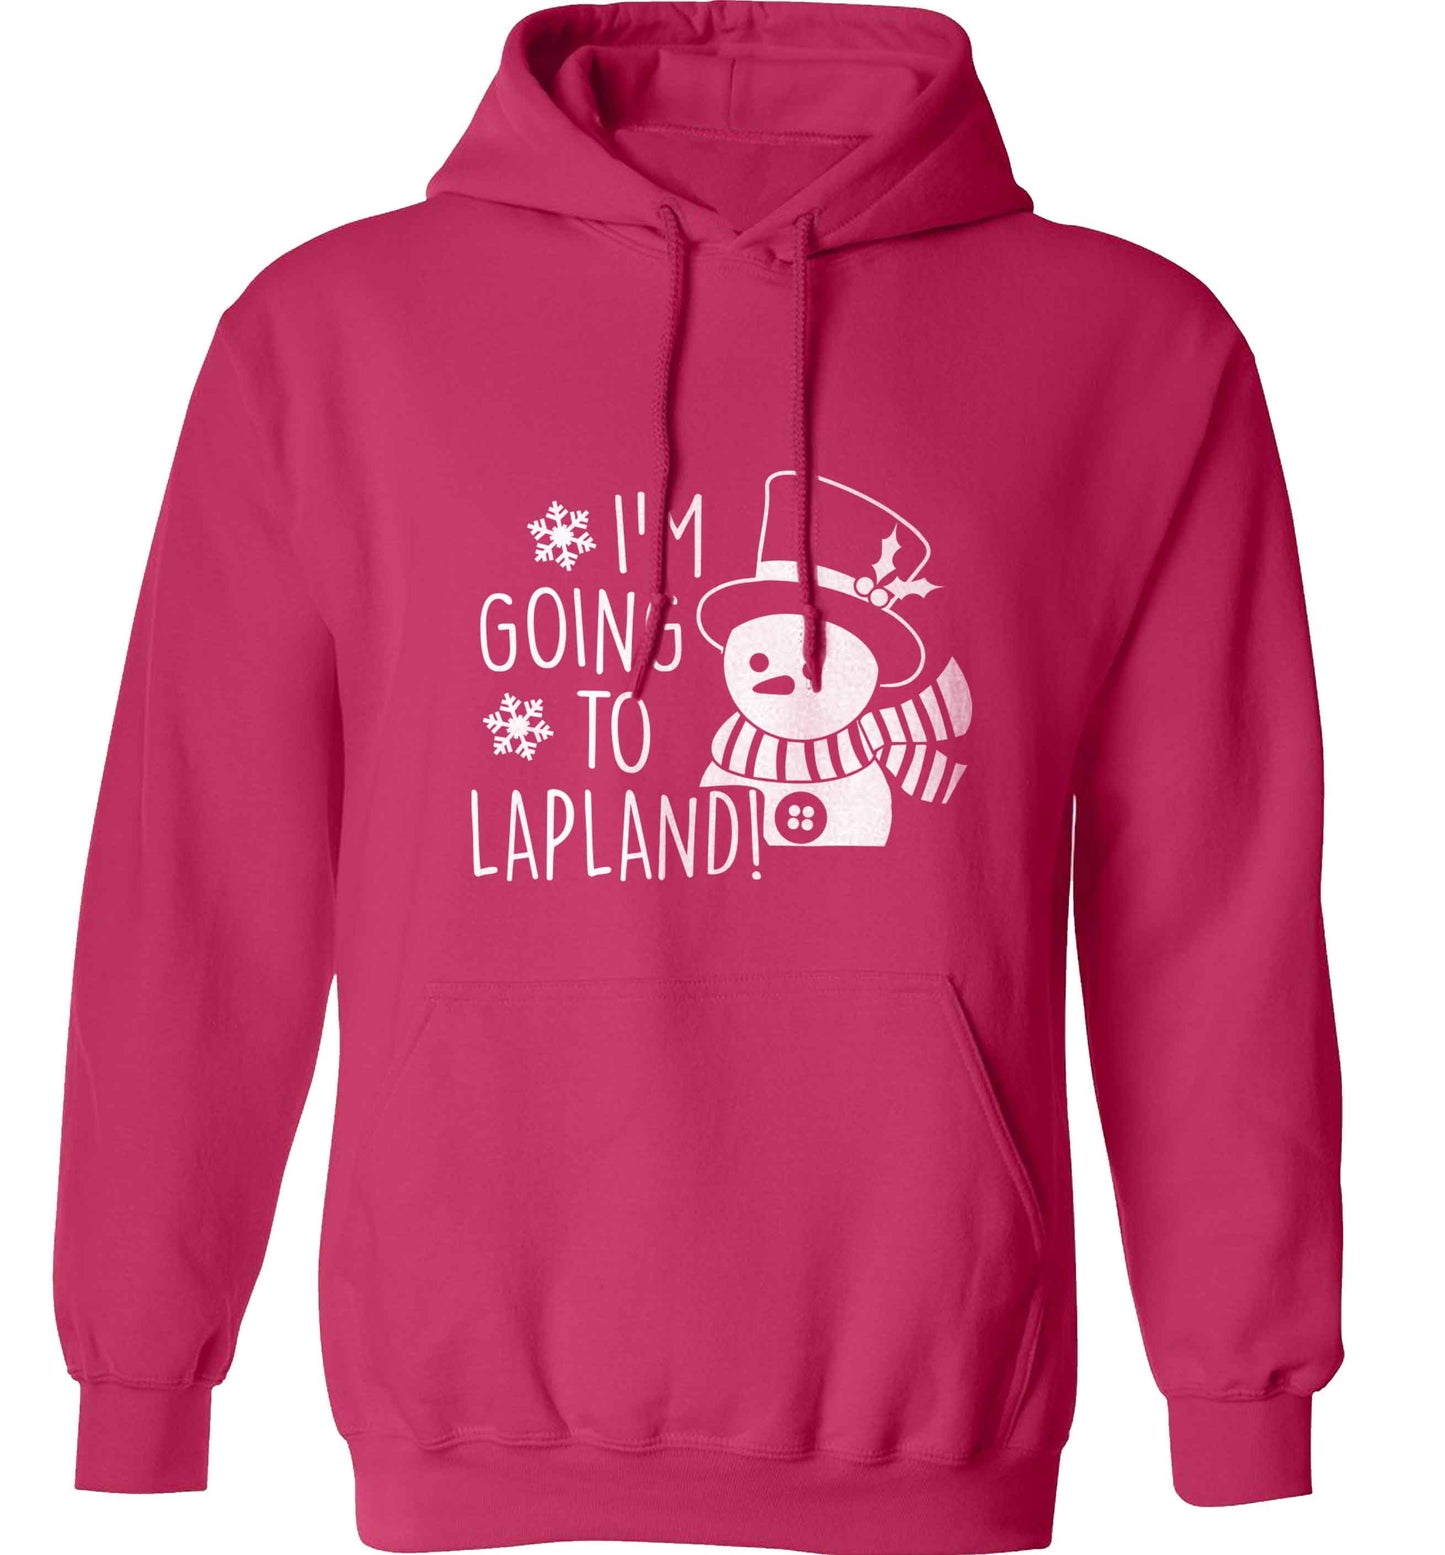 I'm going to Lapland adults unisex pink hoodie 2XL